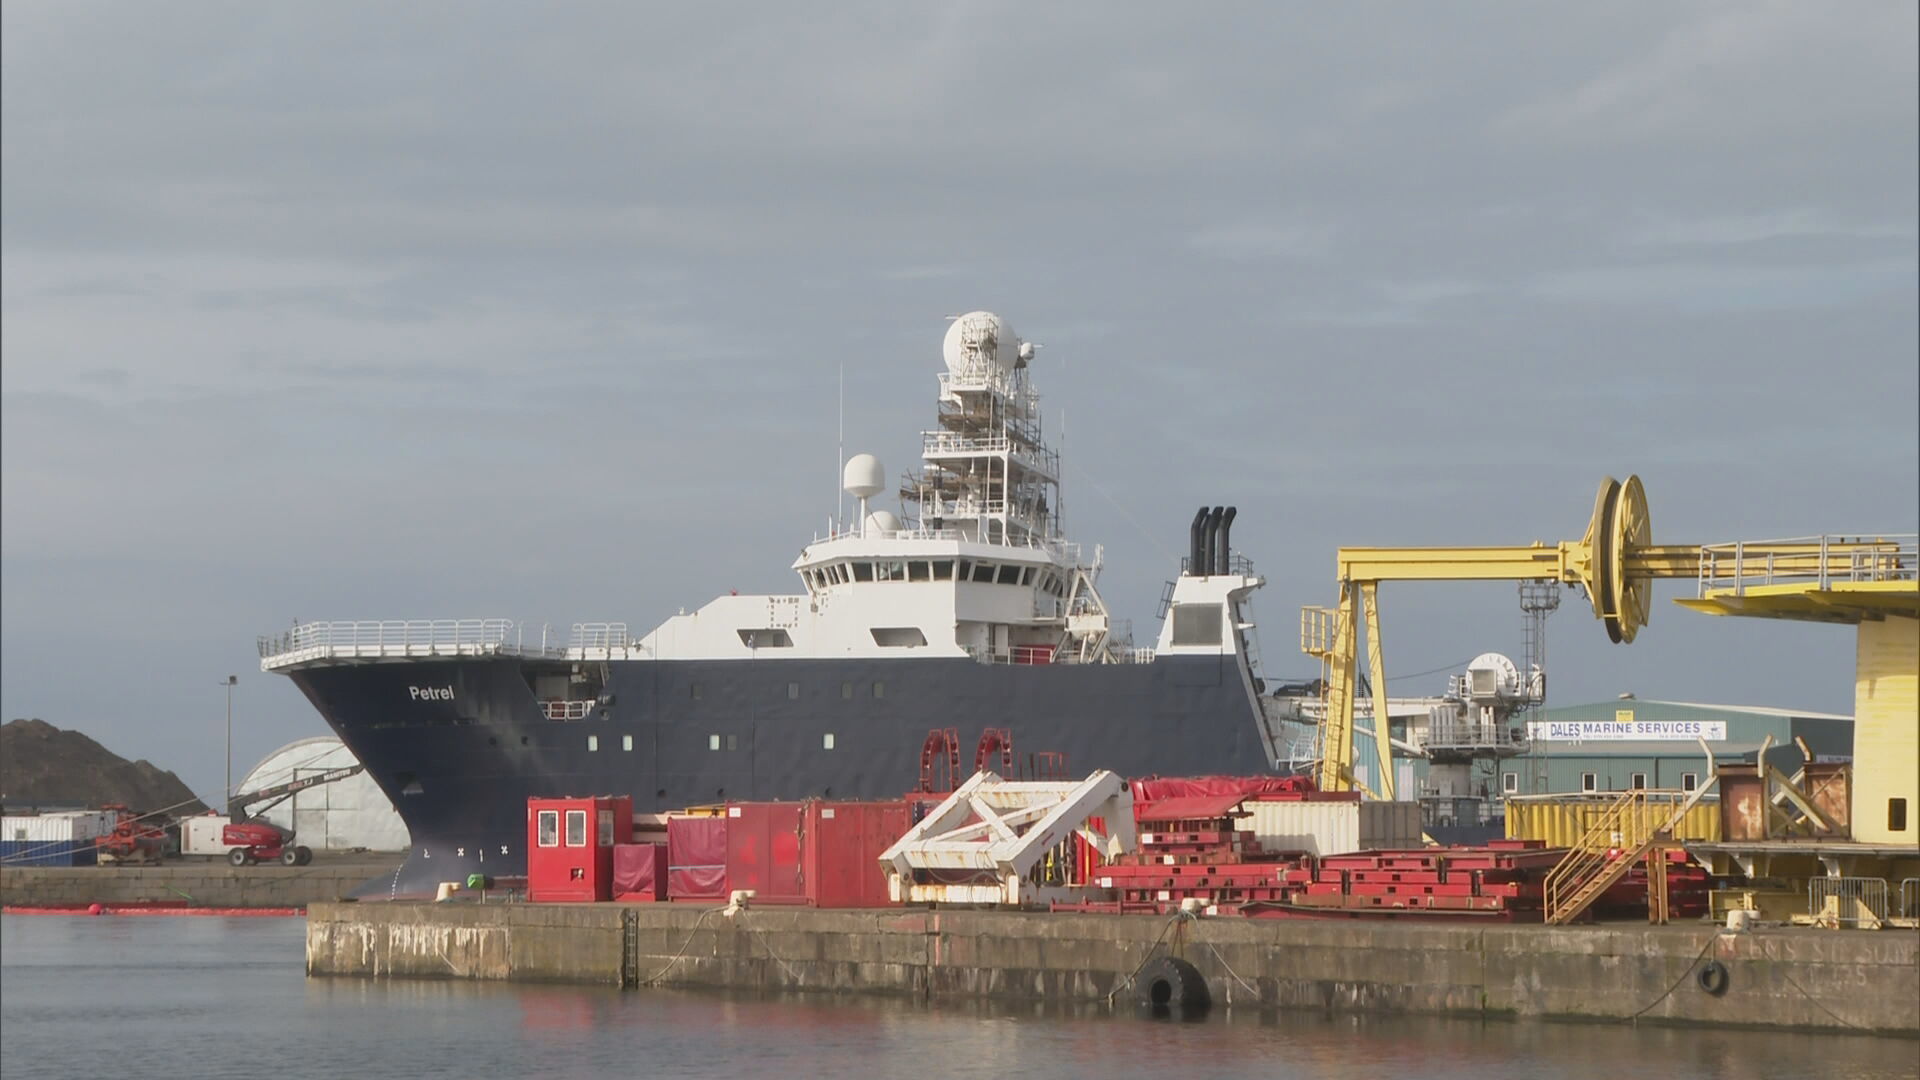 MV Petrel at Leith Dock is now upright